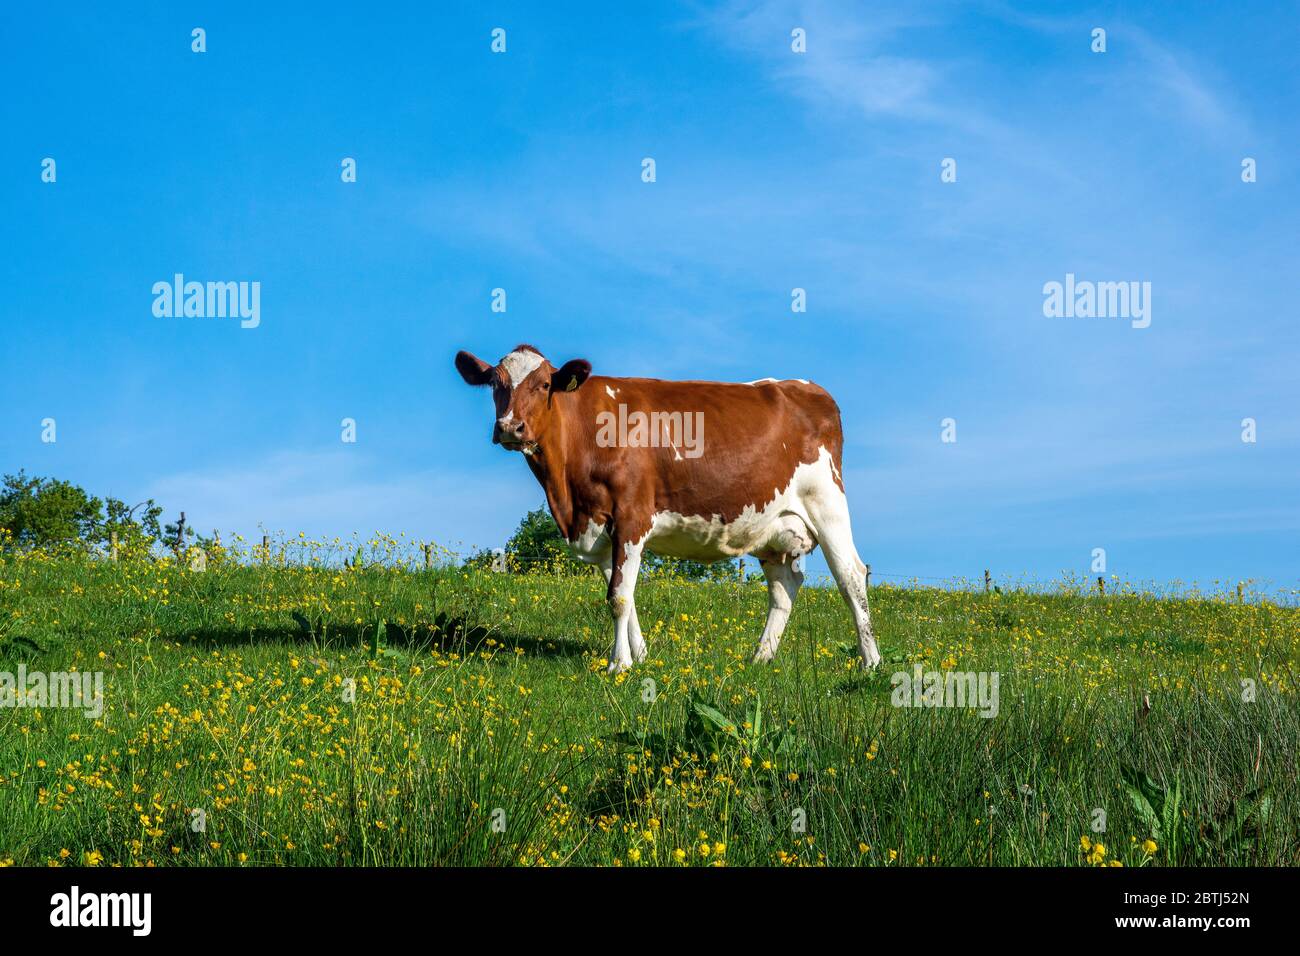 Ayrshire Cow. Ayrshire cattle are a breed of dairy cattle from Ayrshire in southwest Scotland. Stock Photo